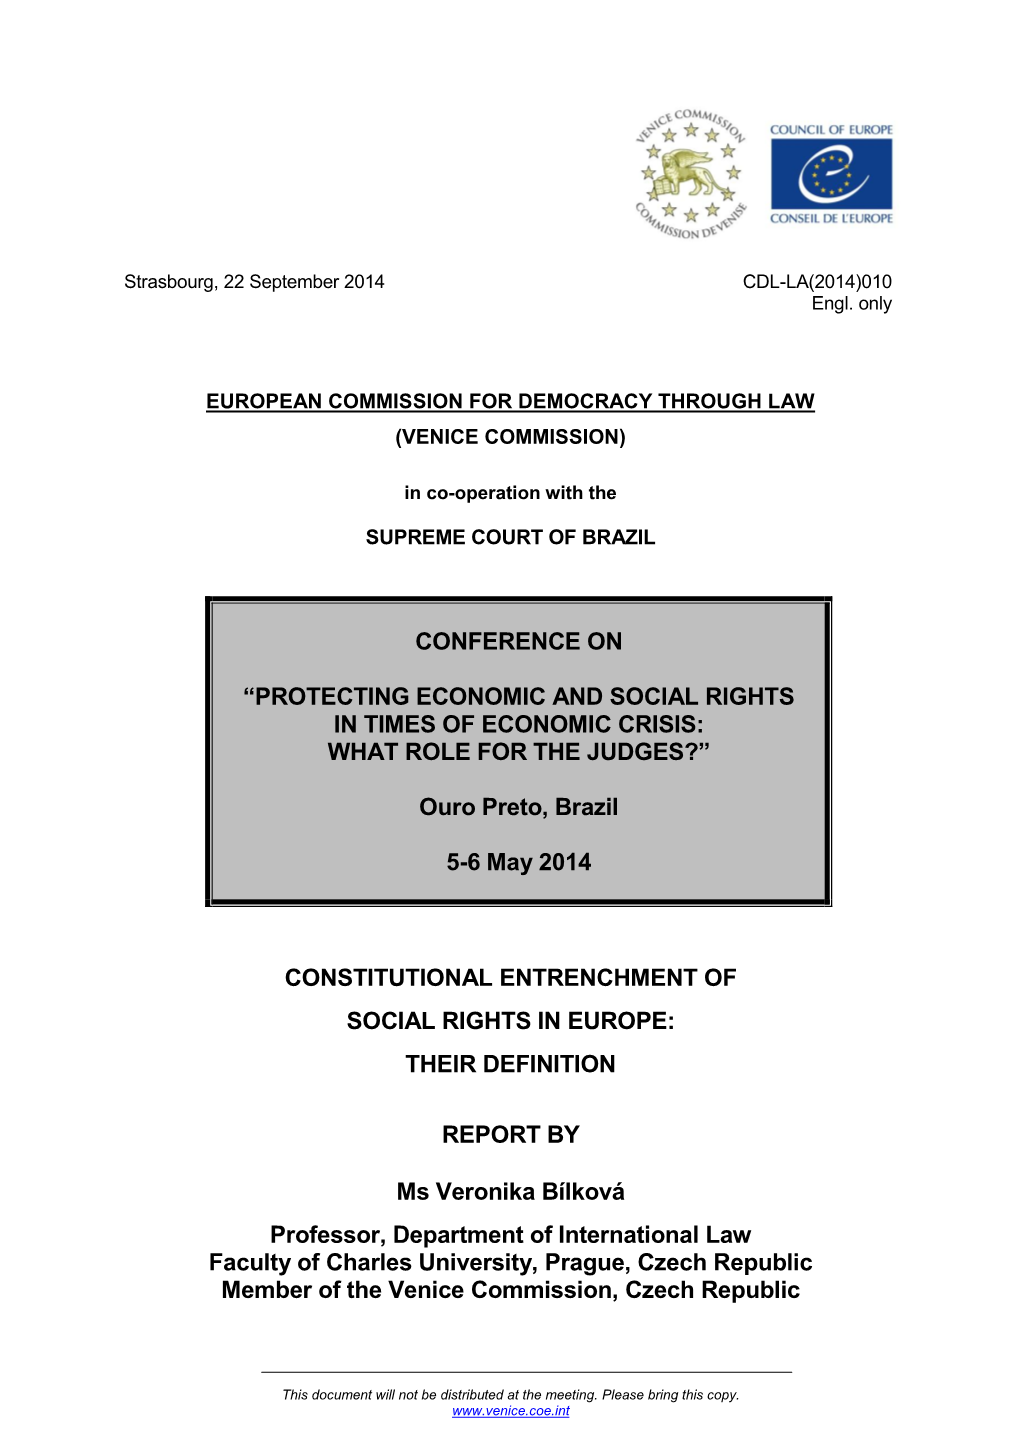 Conference on “Protecting Economic and Social Rights